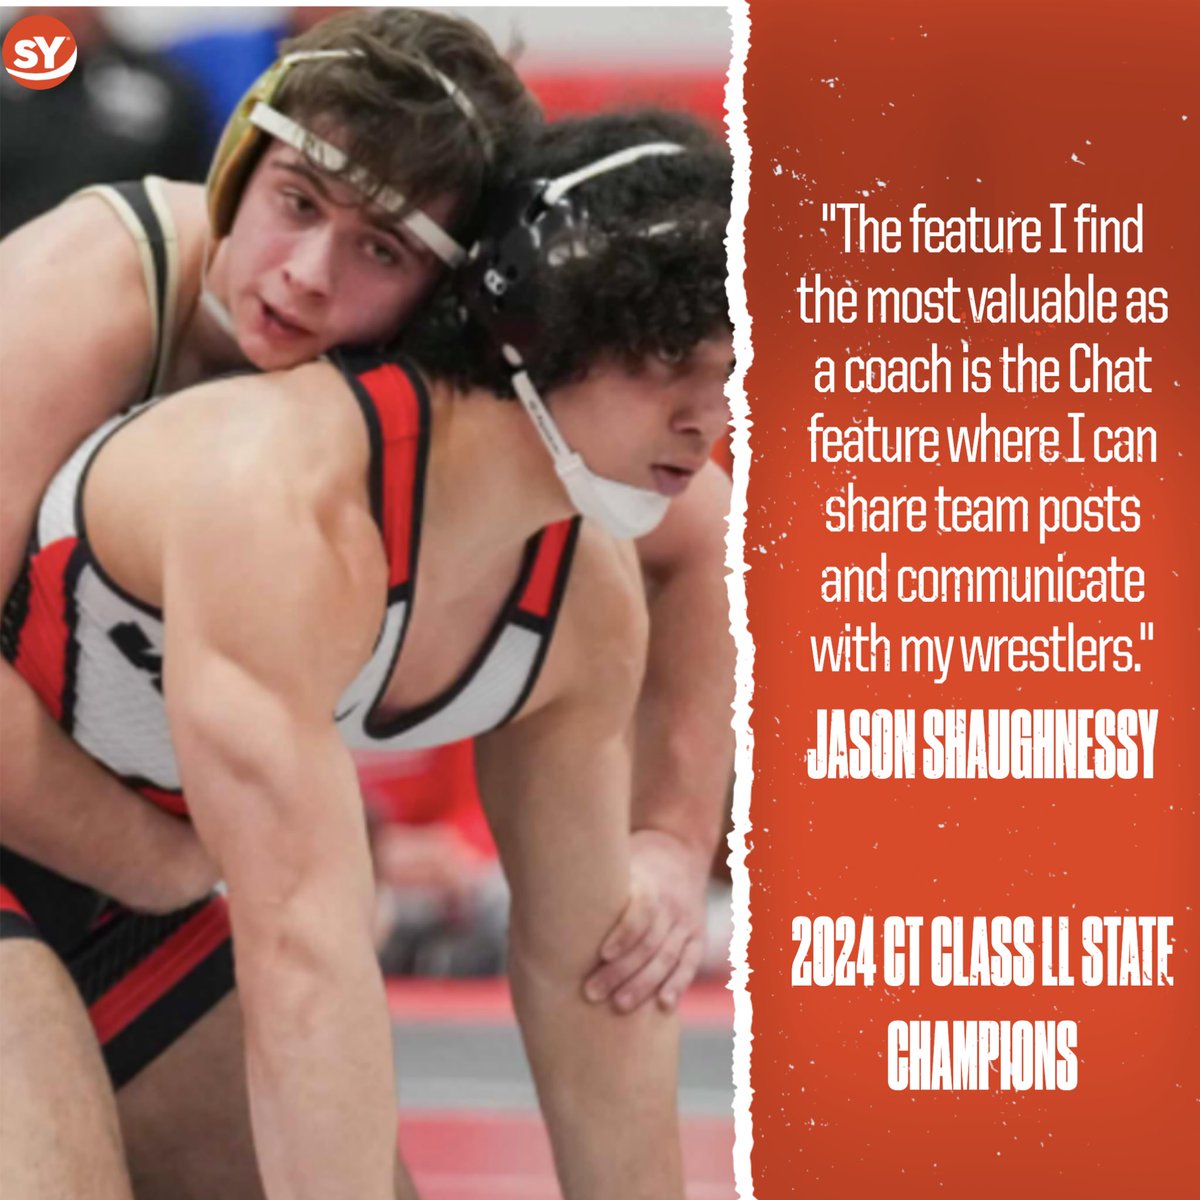 This week’s #TeamoftheWeekTuesday celebrates CT Class LL State Wrestling Champions, the Fairfield Warde Mustangs. Congrats to Coach Jason Shaughnessy, and thank you for making great communication a part of your championship season on sportsYou!